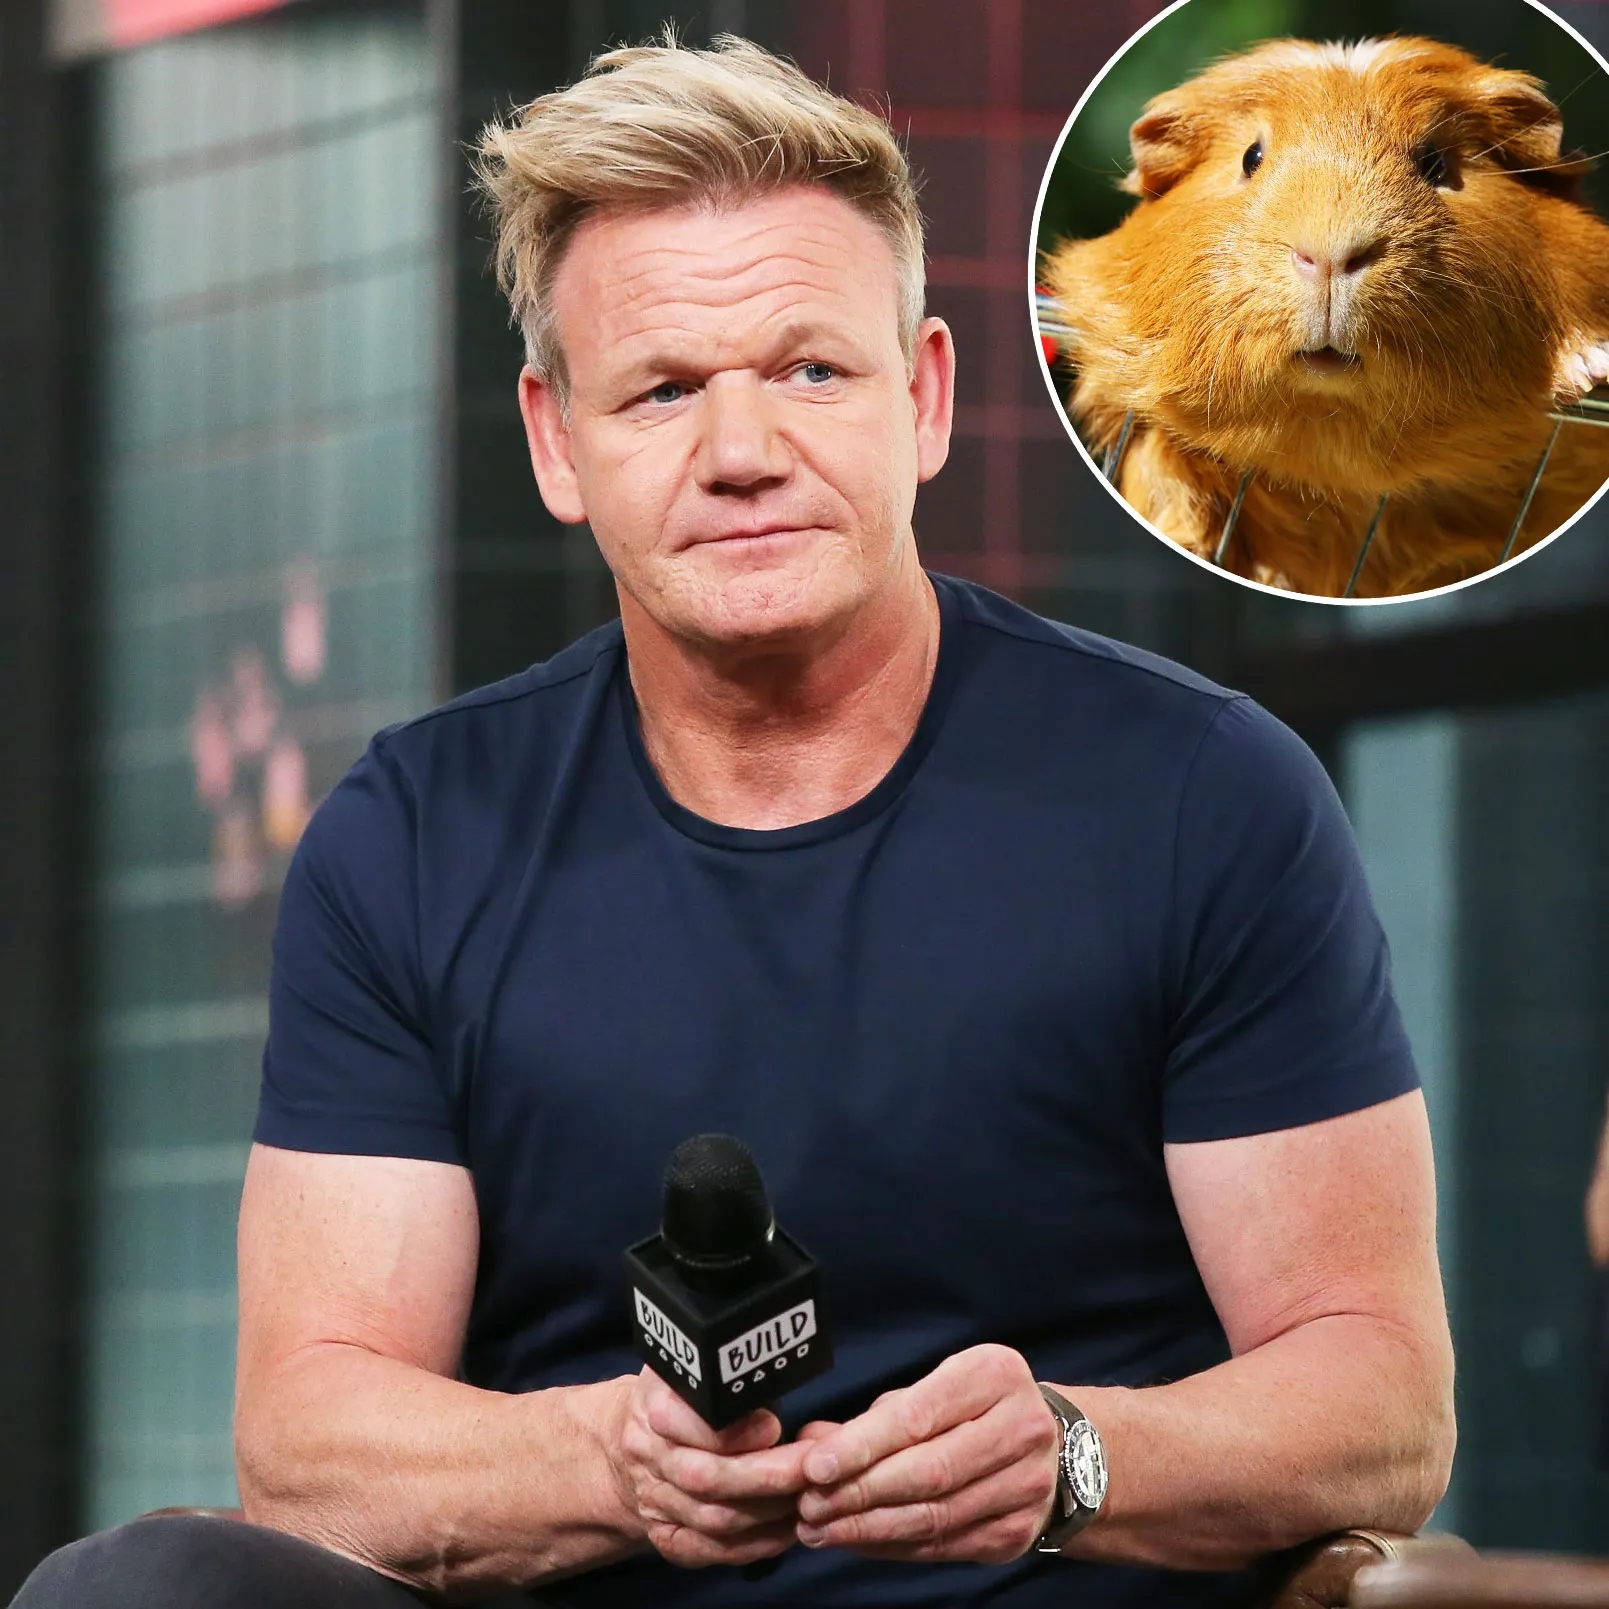 Gordon Ramsay during an interview; Guinea pig